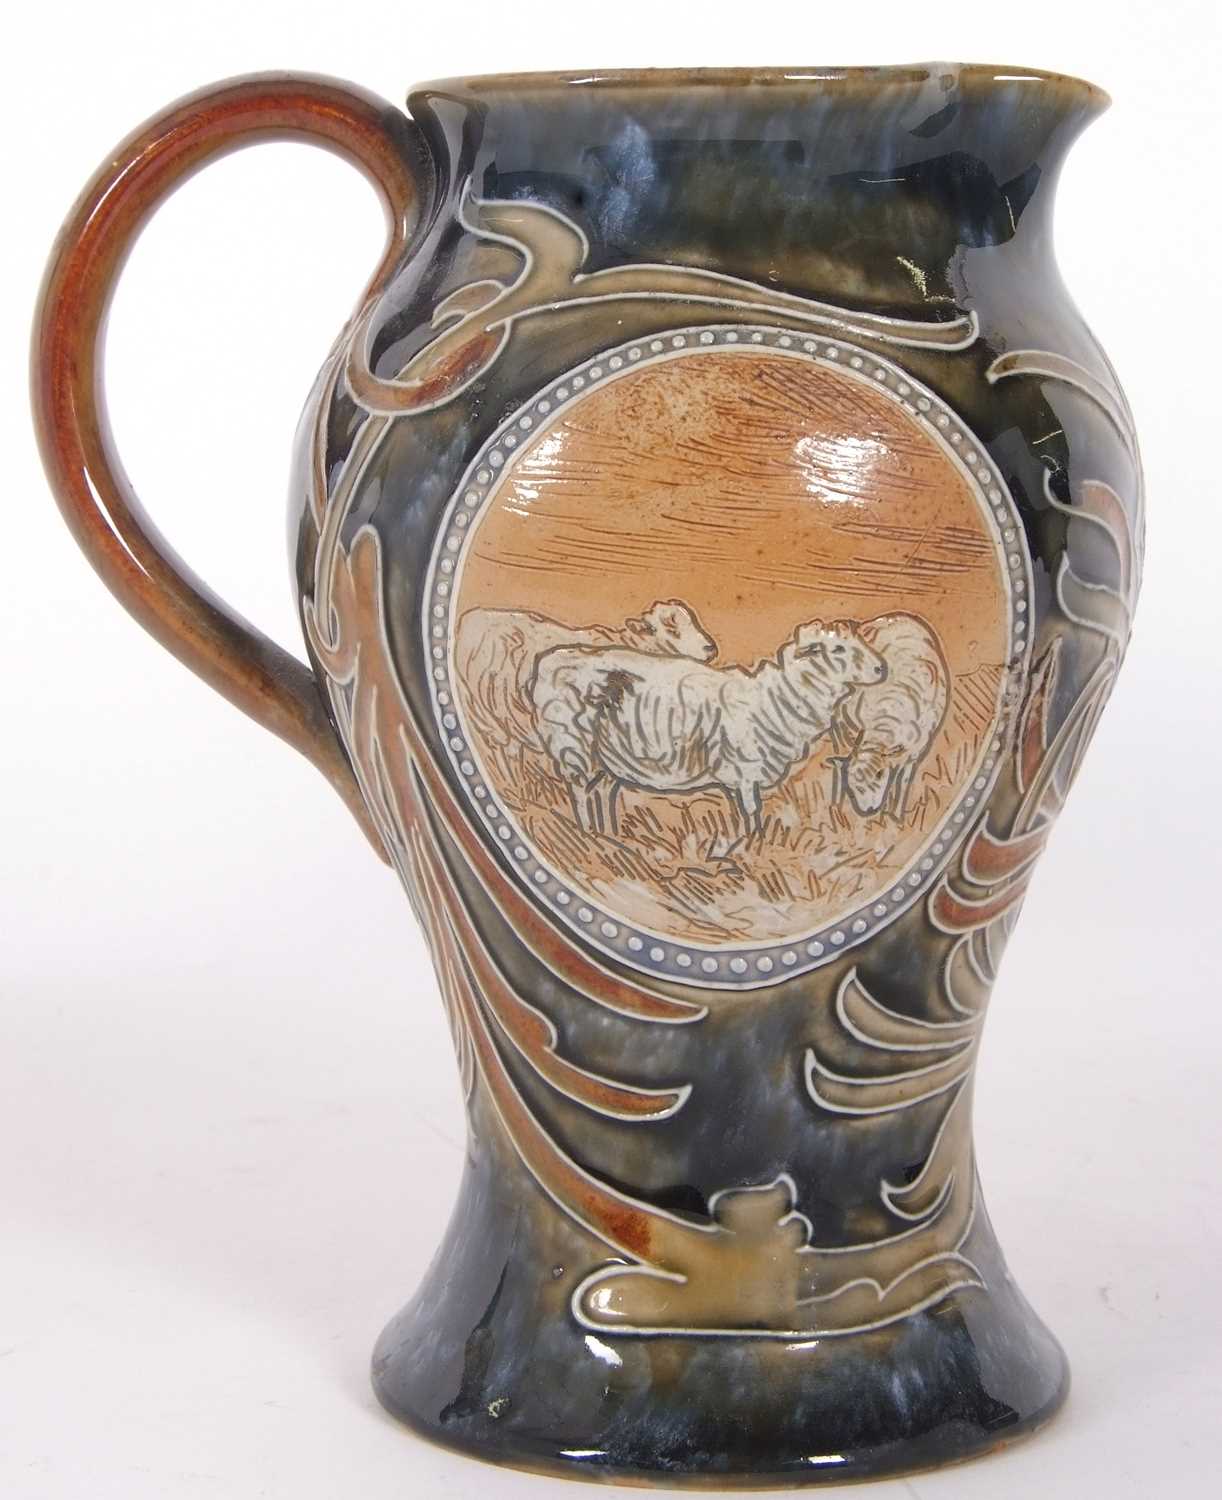 Royal Doulton jug of baluster form with incised Art Nouveau decoration and oval panels of sheep by - Image 4 of 6